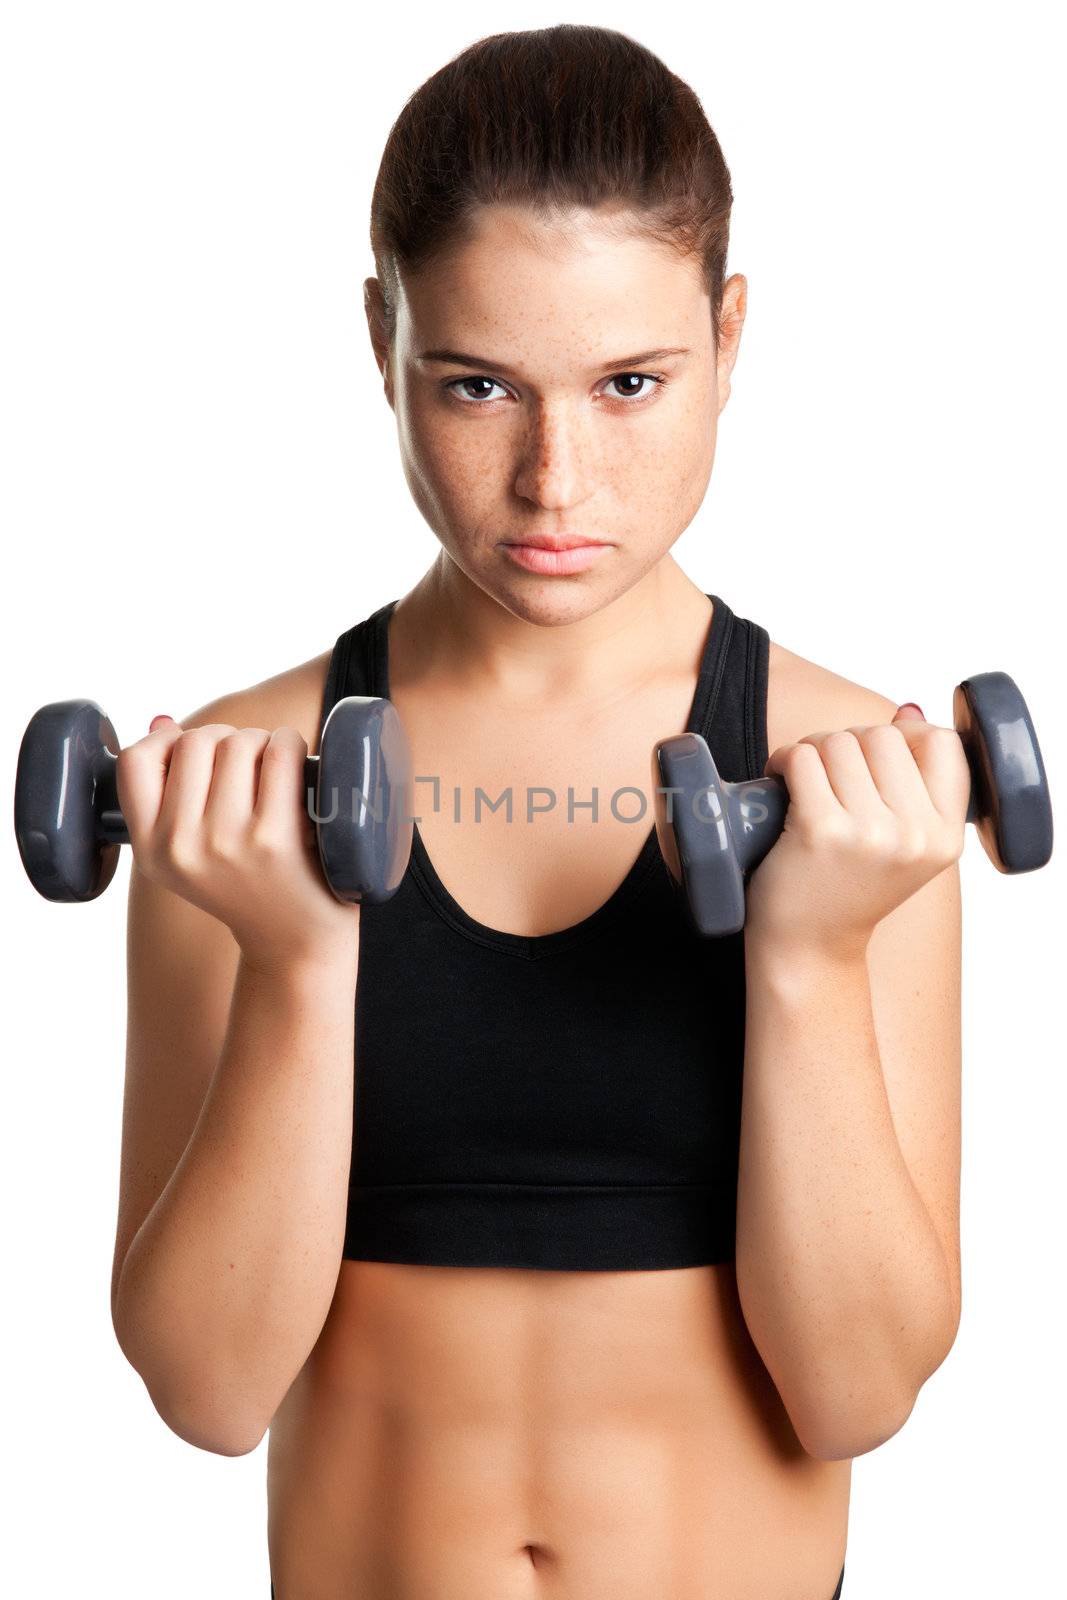 Woman working out with dumbbells at a gym